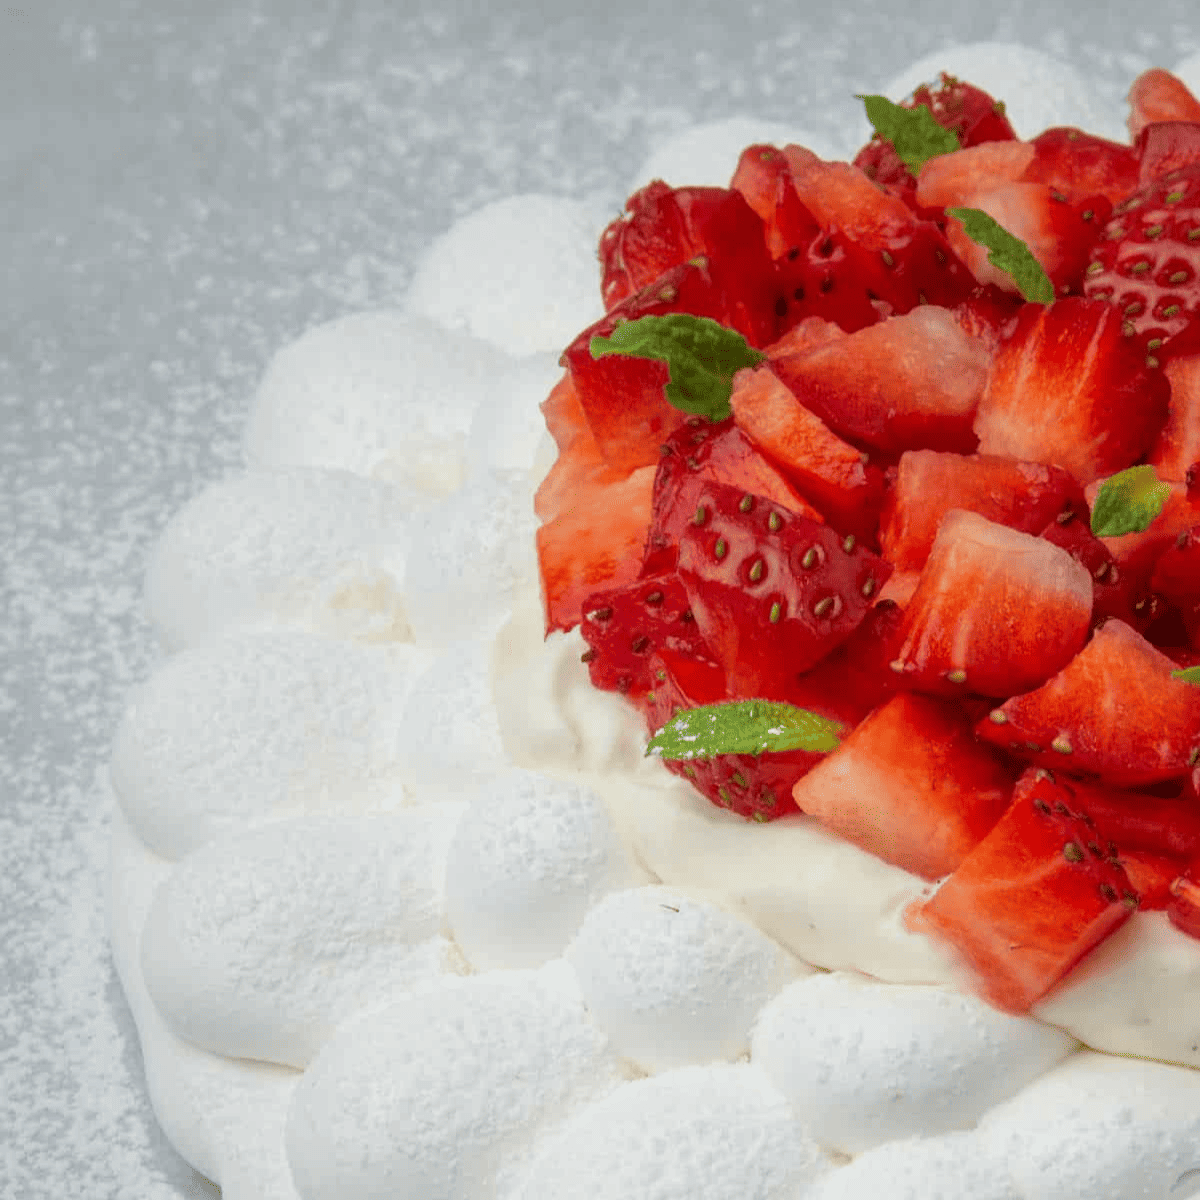 <p>This <strong><a href="https://www.spatuladesserts.com/strawberry-pavlova/#recipe">Strawberry Pavlova</a></strong> cake is the perfect dessert for Spring and Summer, the most amazing Pavlova dessert ever! Crunchy on the outside, marshmallow texture inside, decorated with homemade whipped cream, fresh strawberry, and some mint leaves!</p> <p><strong>Go to the recipe: <a href="https://www.spatuladesserts.com/strawberry-pavlova/#recipe">Strawberry Pavlova</a></strong></p>